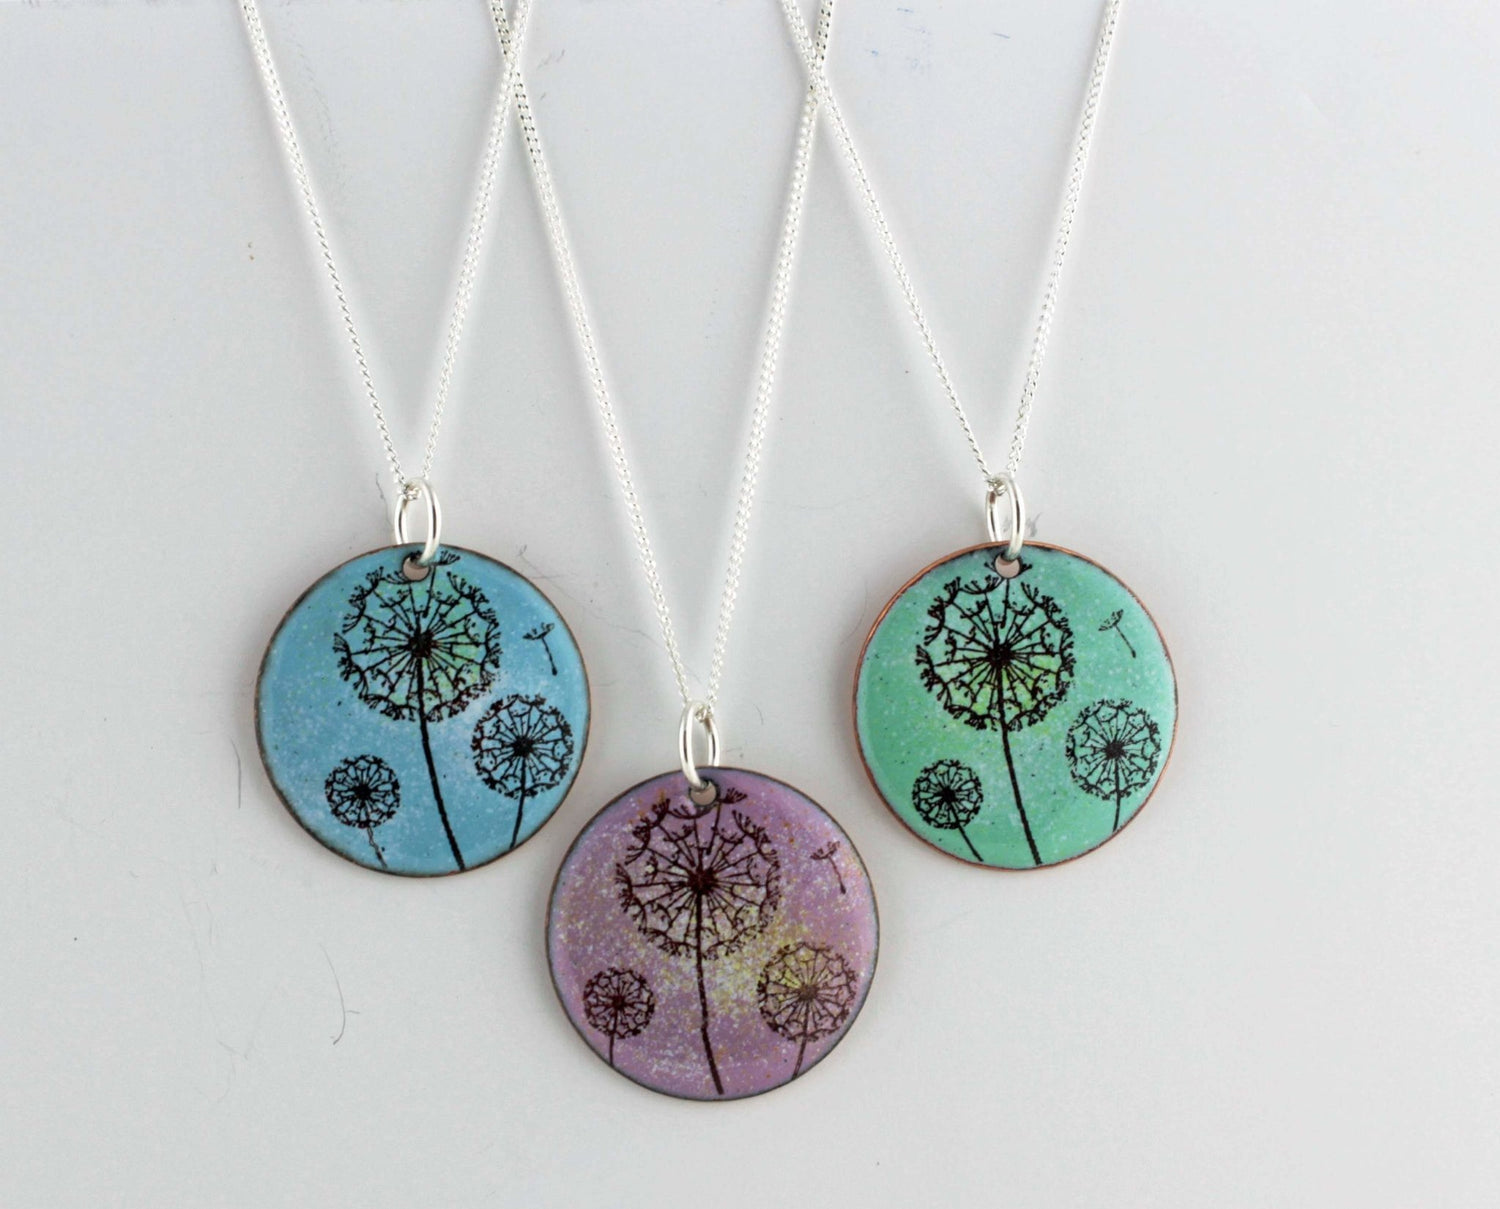 Dandelion Enamel Pendant on 18' sterling silver chain available in blue, green, lilac/pink. - Katie Johnston Jewellery